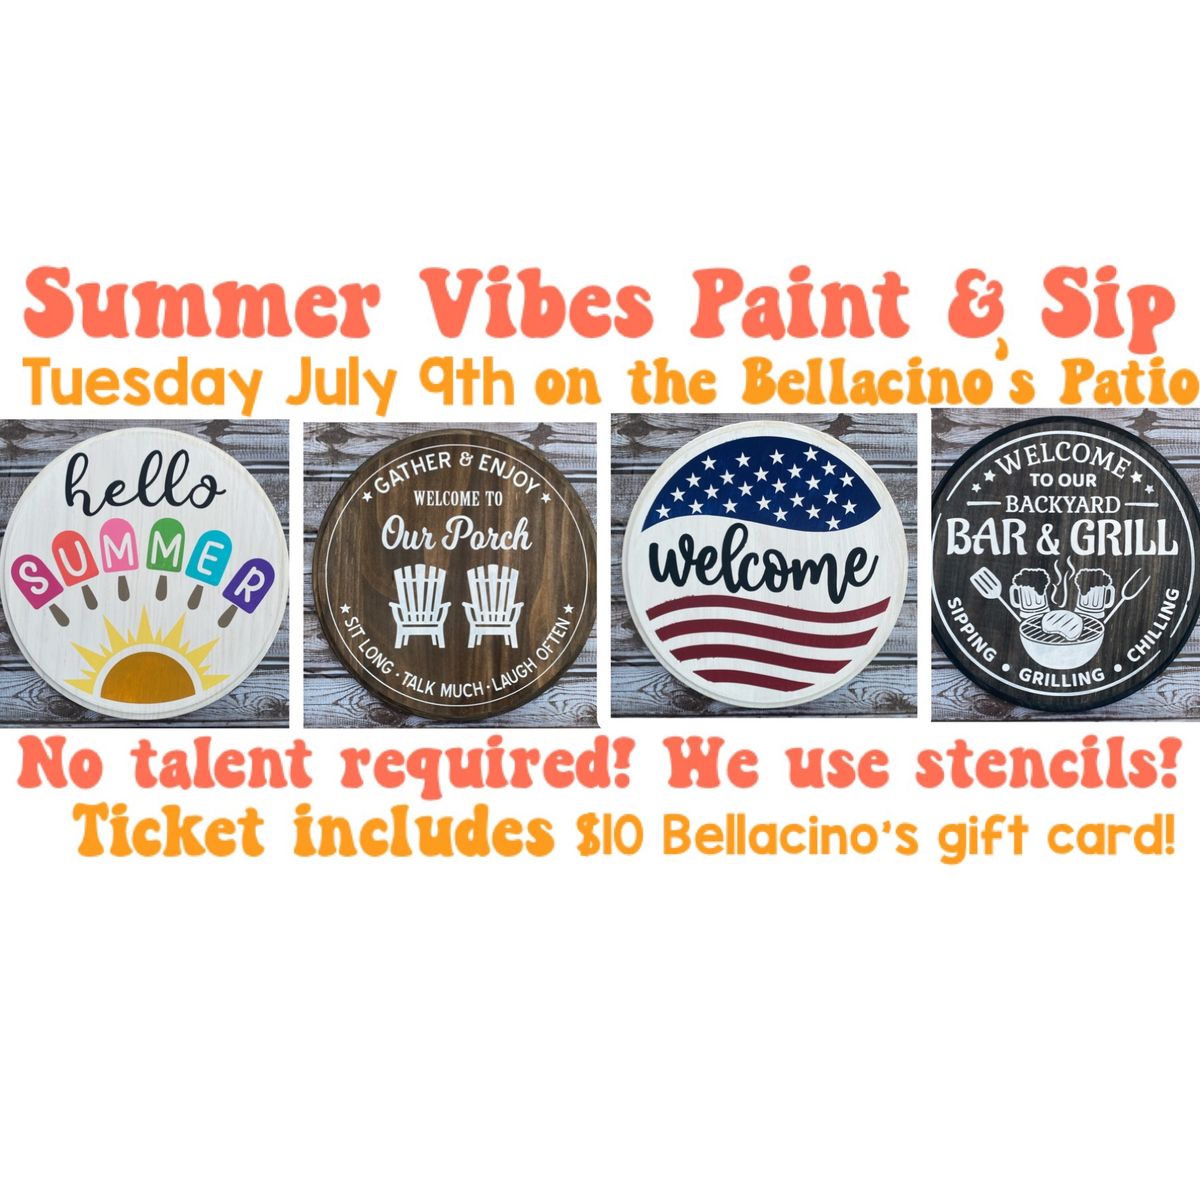 Summer Vibes Paint & Sip on the Bellacino's Patio